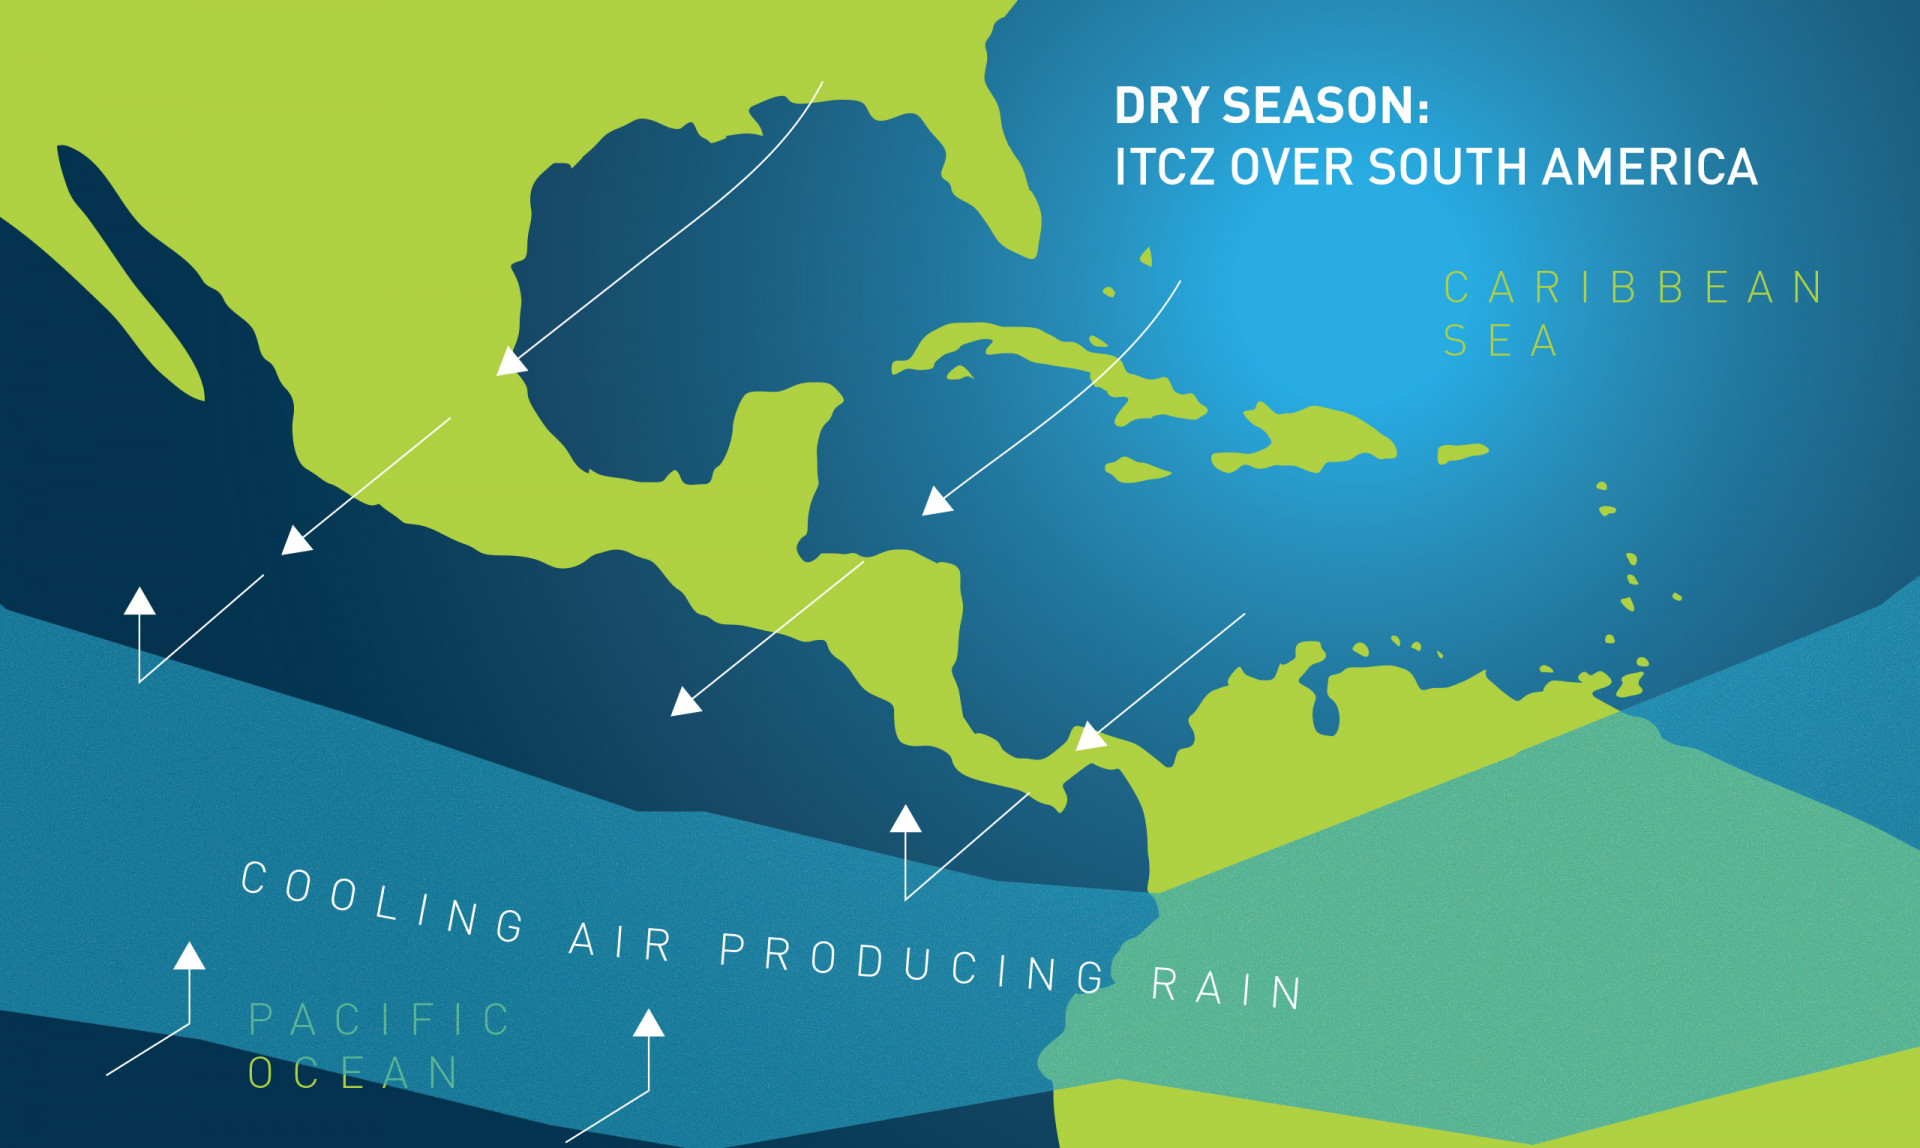 By mid-December, the ITCZ is pushed south by the northeast trade winds that blow over Panama and create predominantly dry conditions that usually last until April